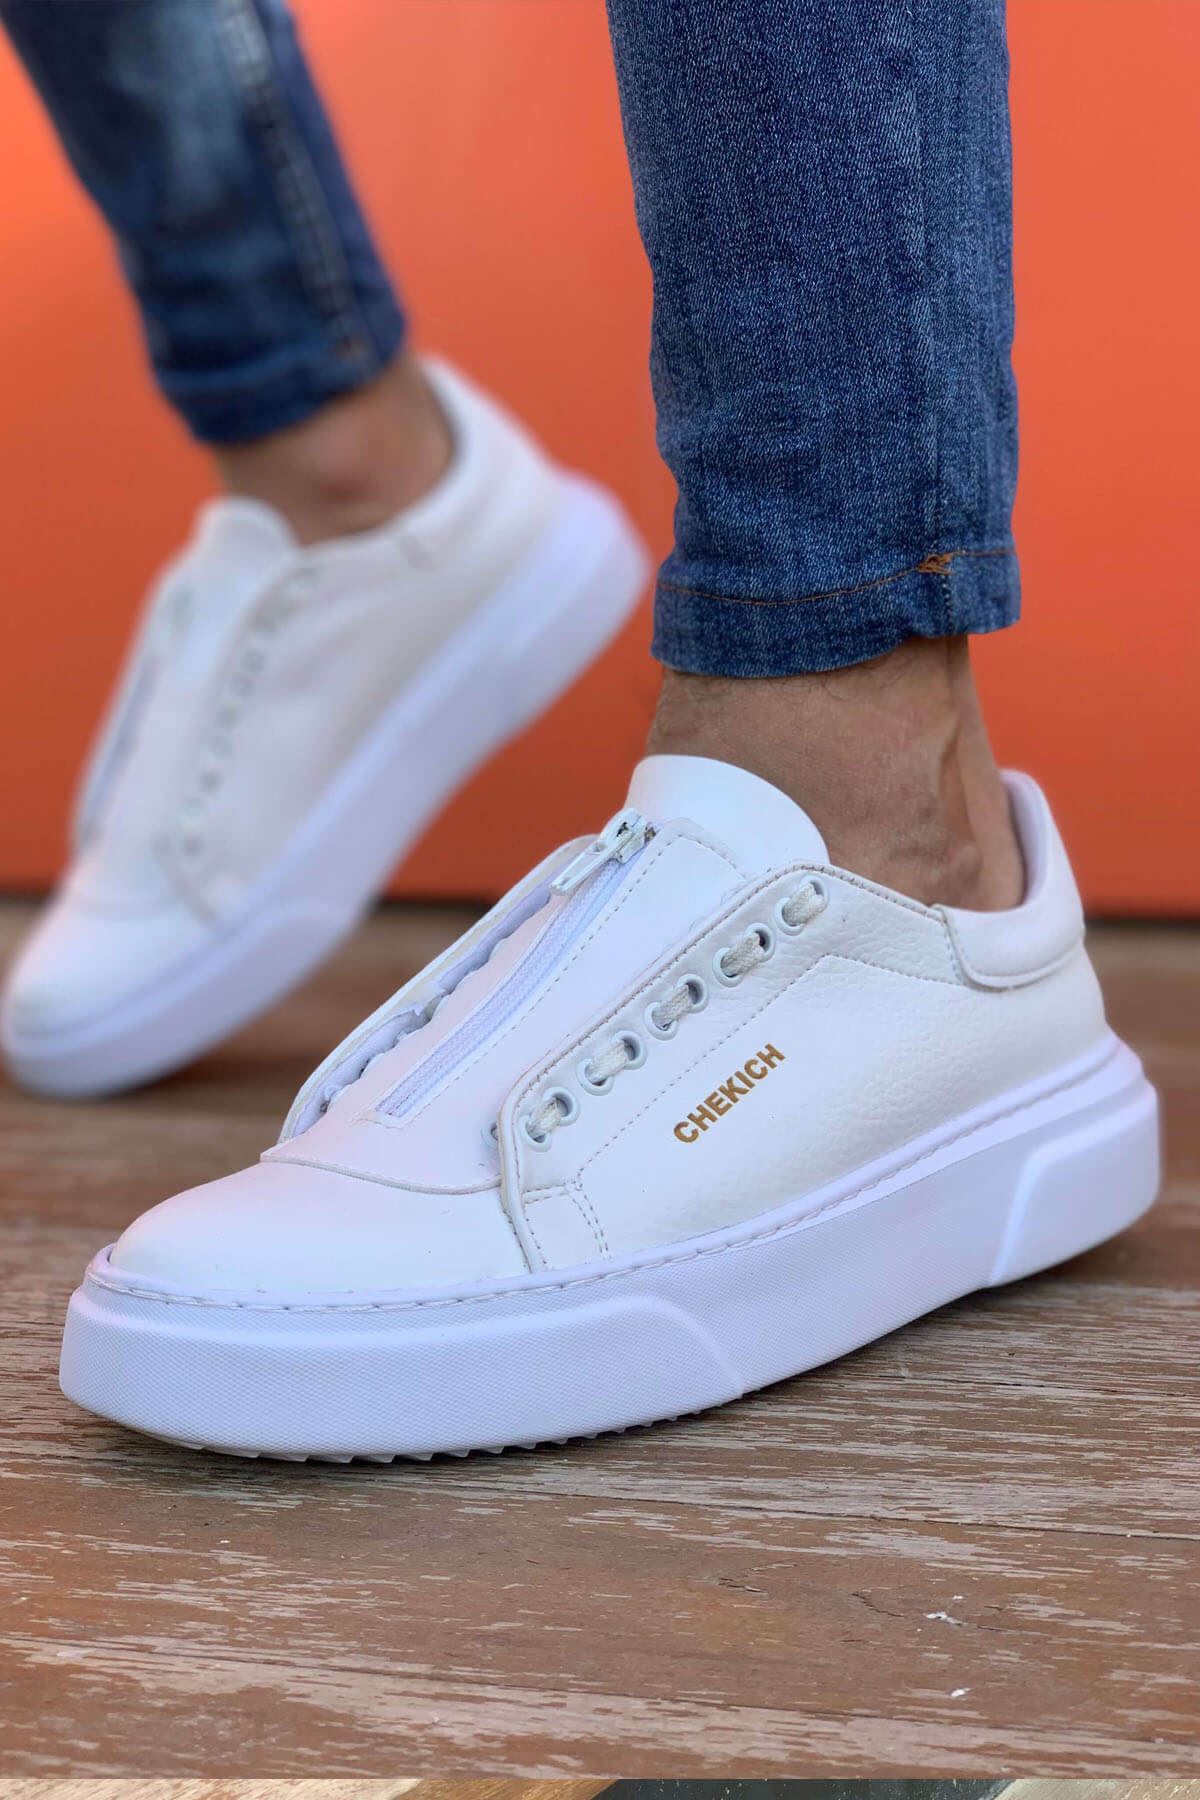 Chekich Men's Shoes White and Yellow Artificial Leather Zipper Closure Mixed Color Sneakers For Spring Season Casual Sport Breathable Light Flexible Air Vulcanized Sewing Base Lace Details New Orange Office CH092 V6